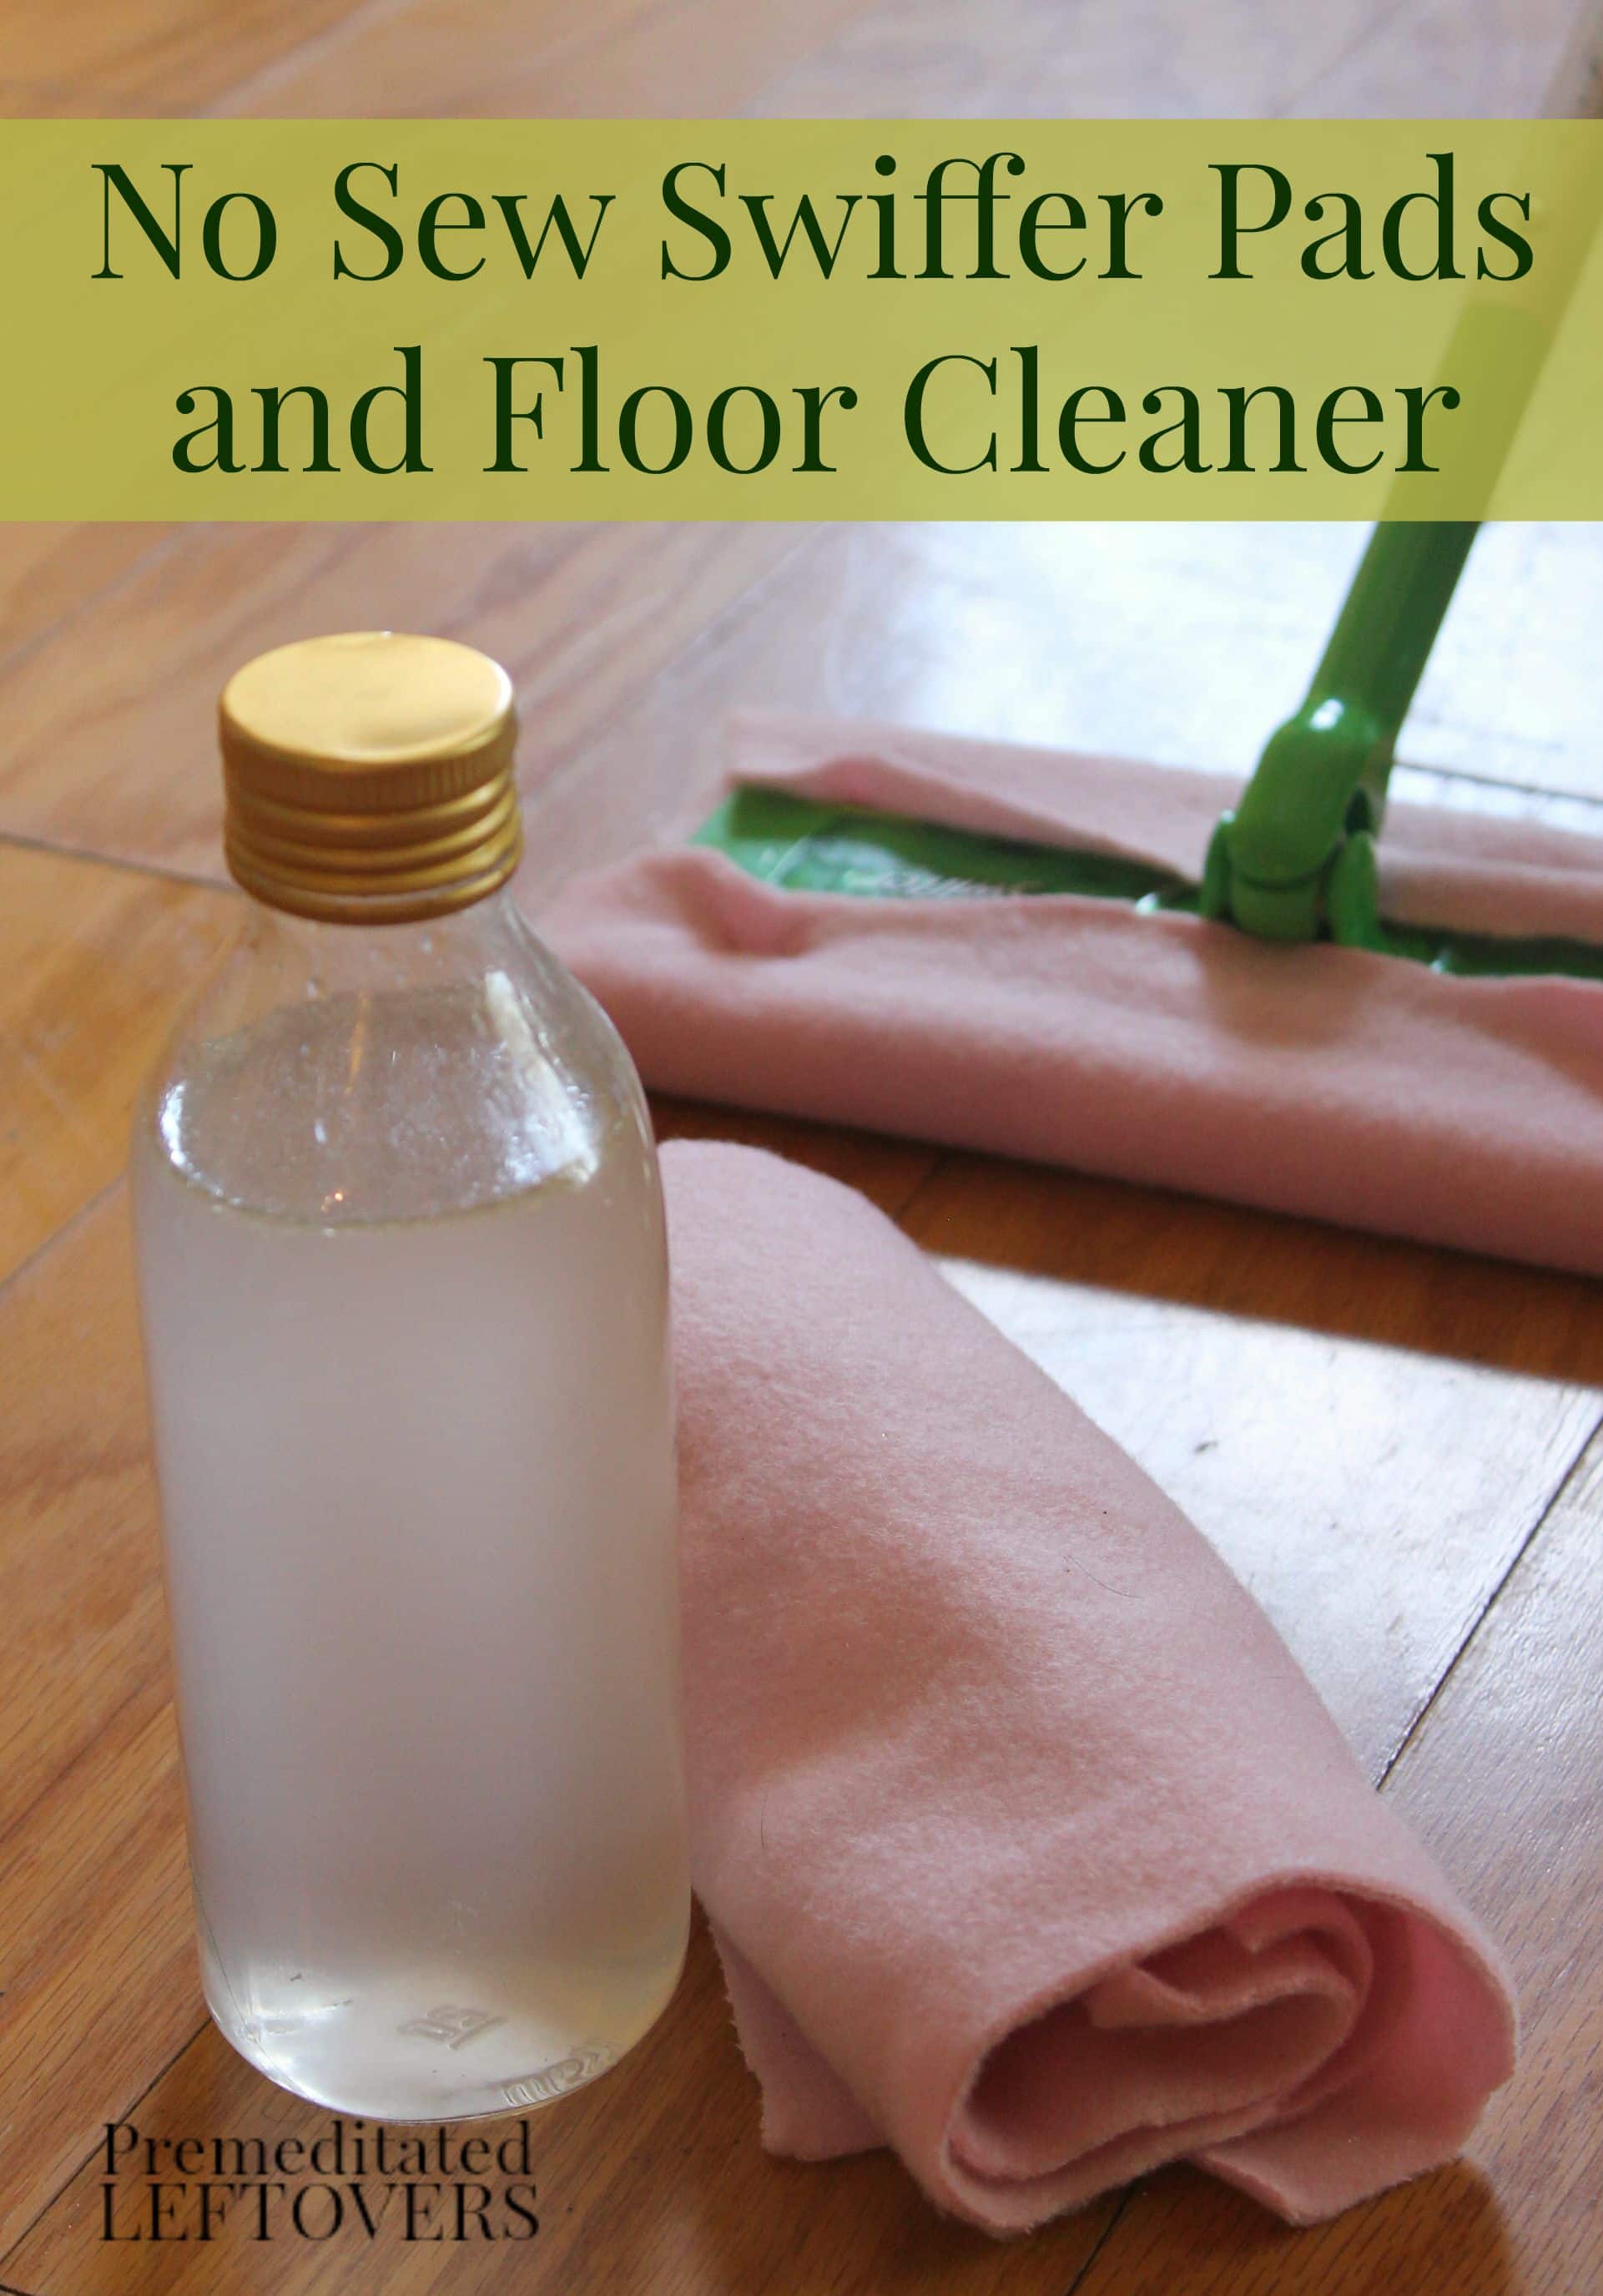 How to Make Homemade Swiffer Pads and Solution - Make your own swiffer pads and solution to cut the chemicals and cost on an everyday household cleaner.